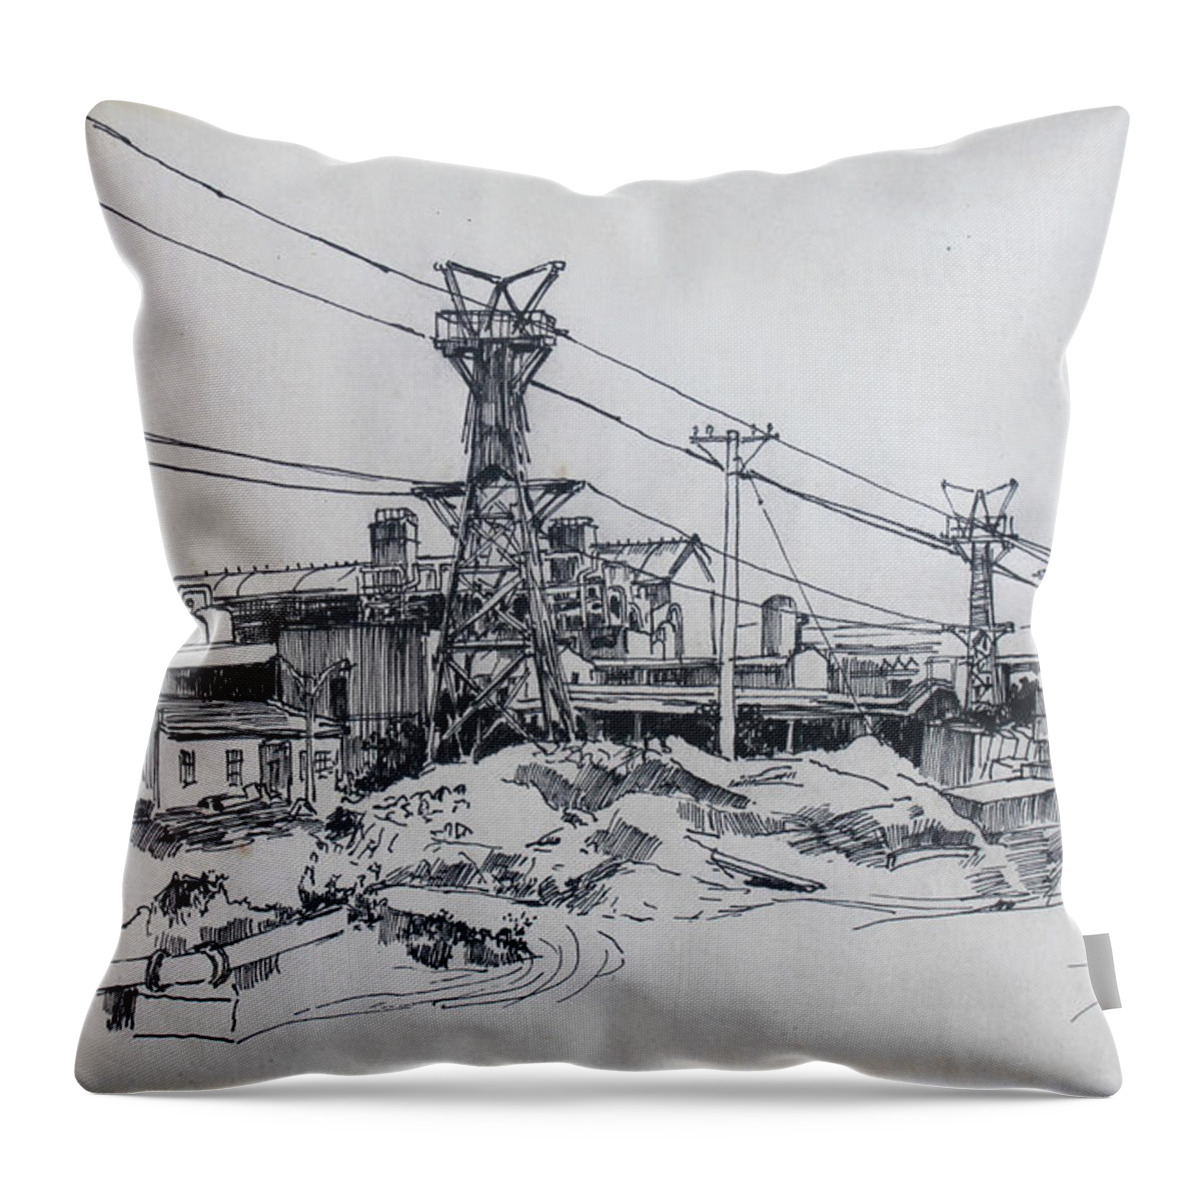 Industrial Site Throw Pillow featuring the drawing Industrial Site by Ylli Haruni